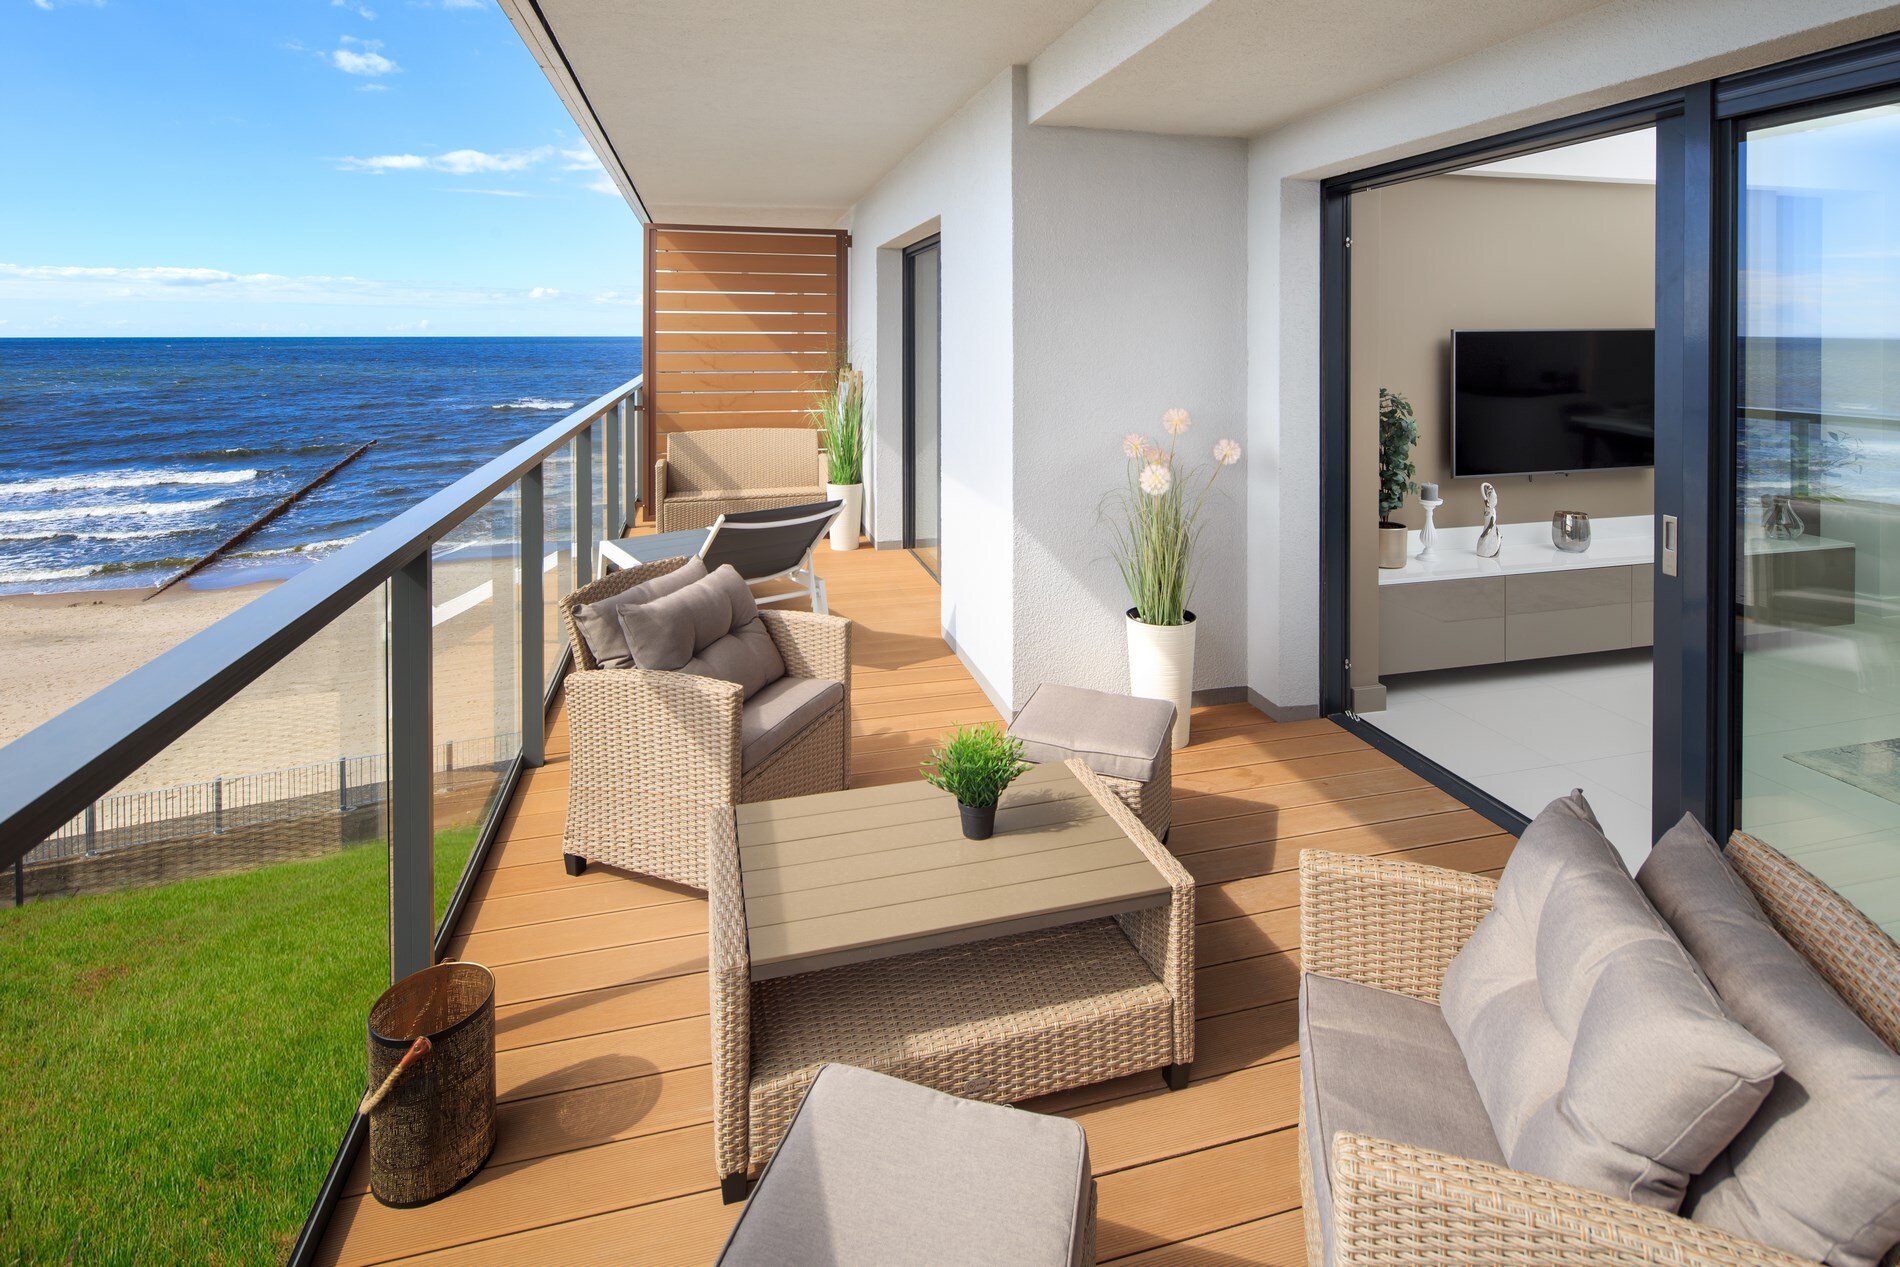 Balcony of Gardenia Seaside Royallux apartment with a seaview